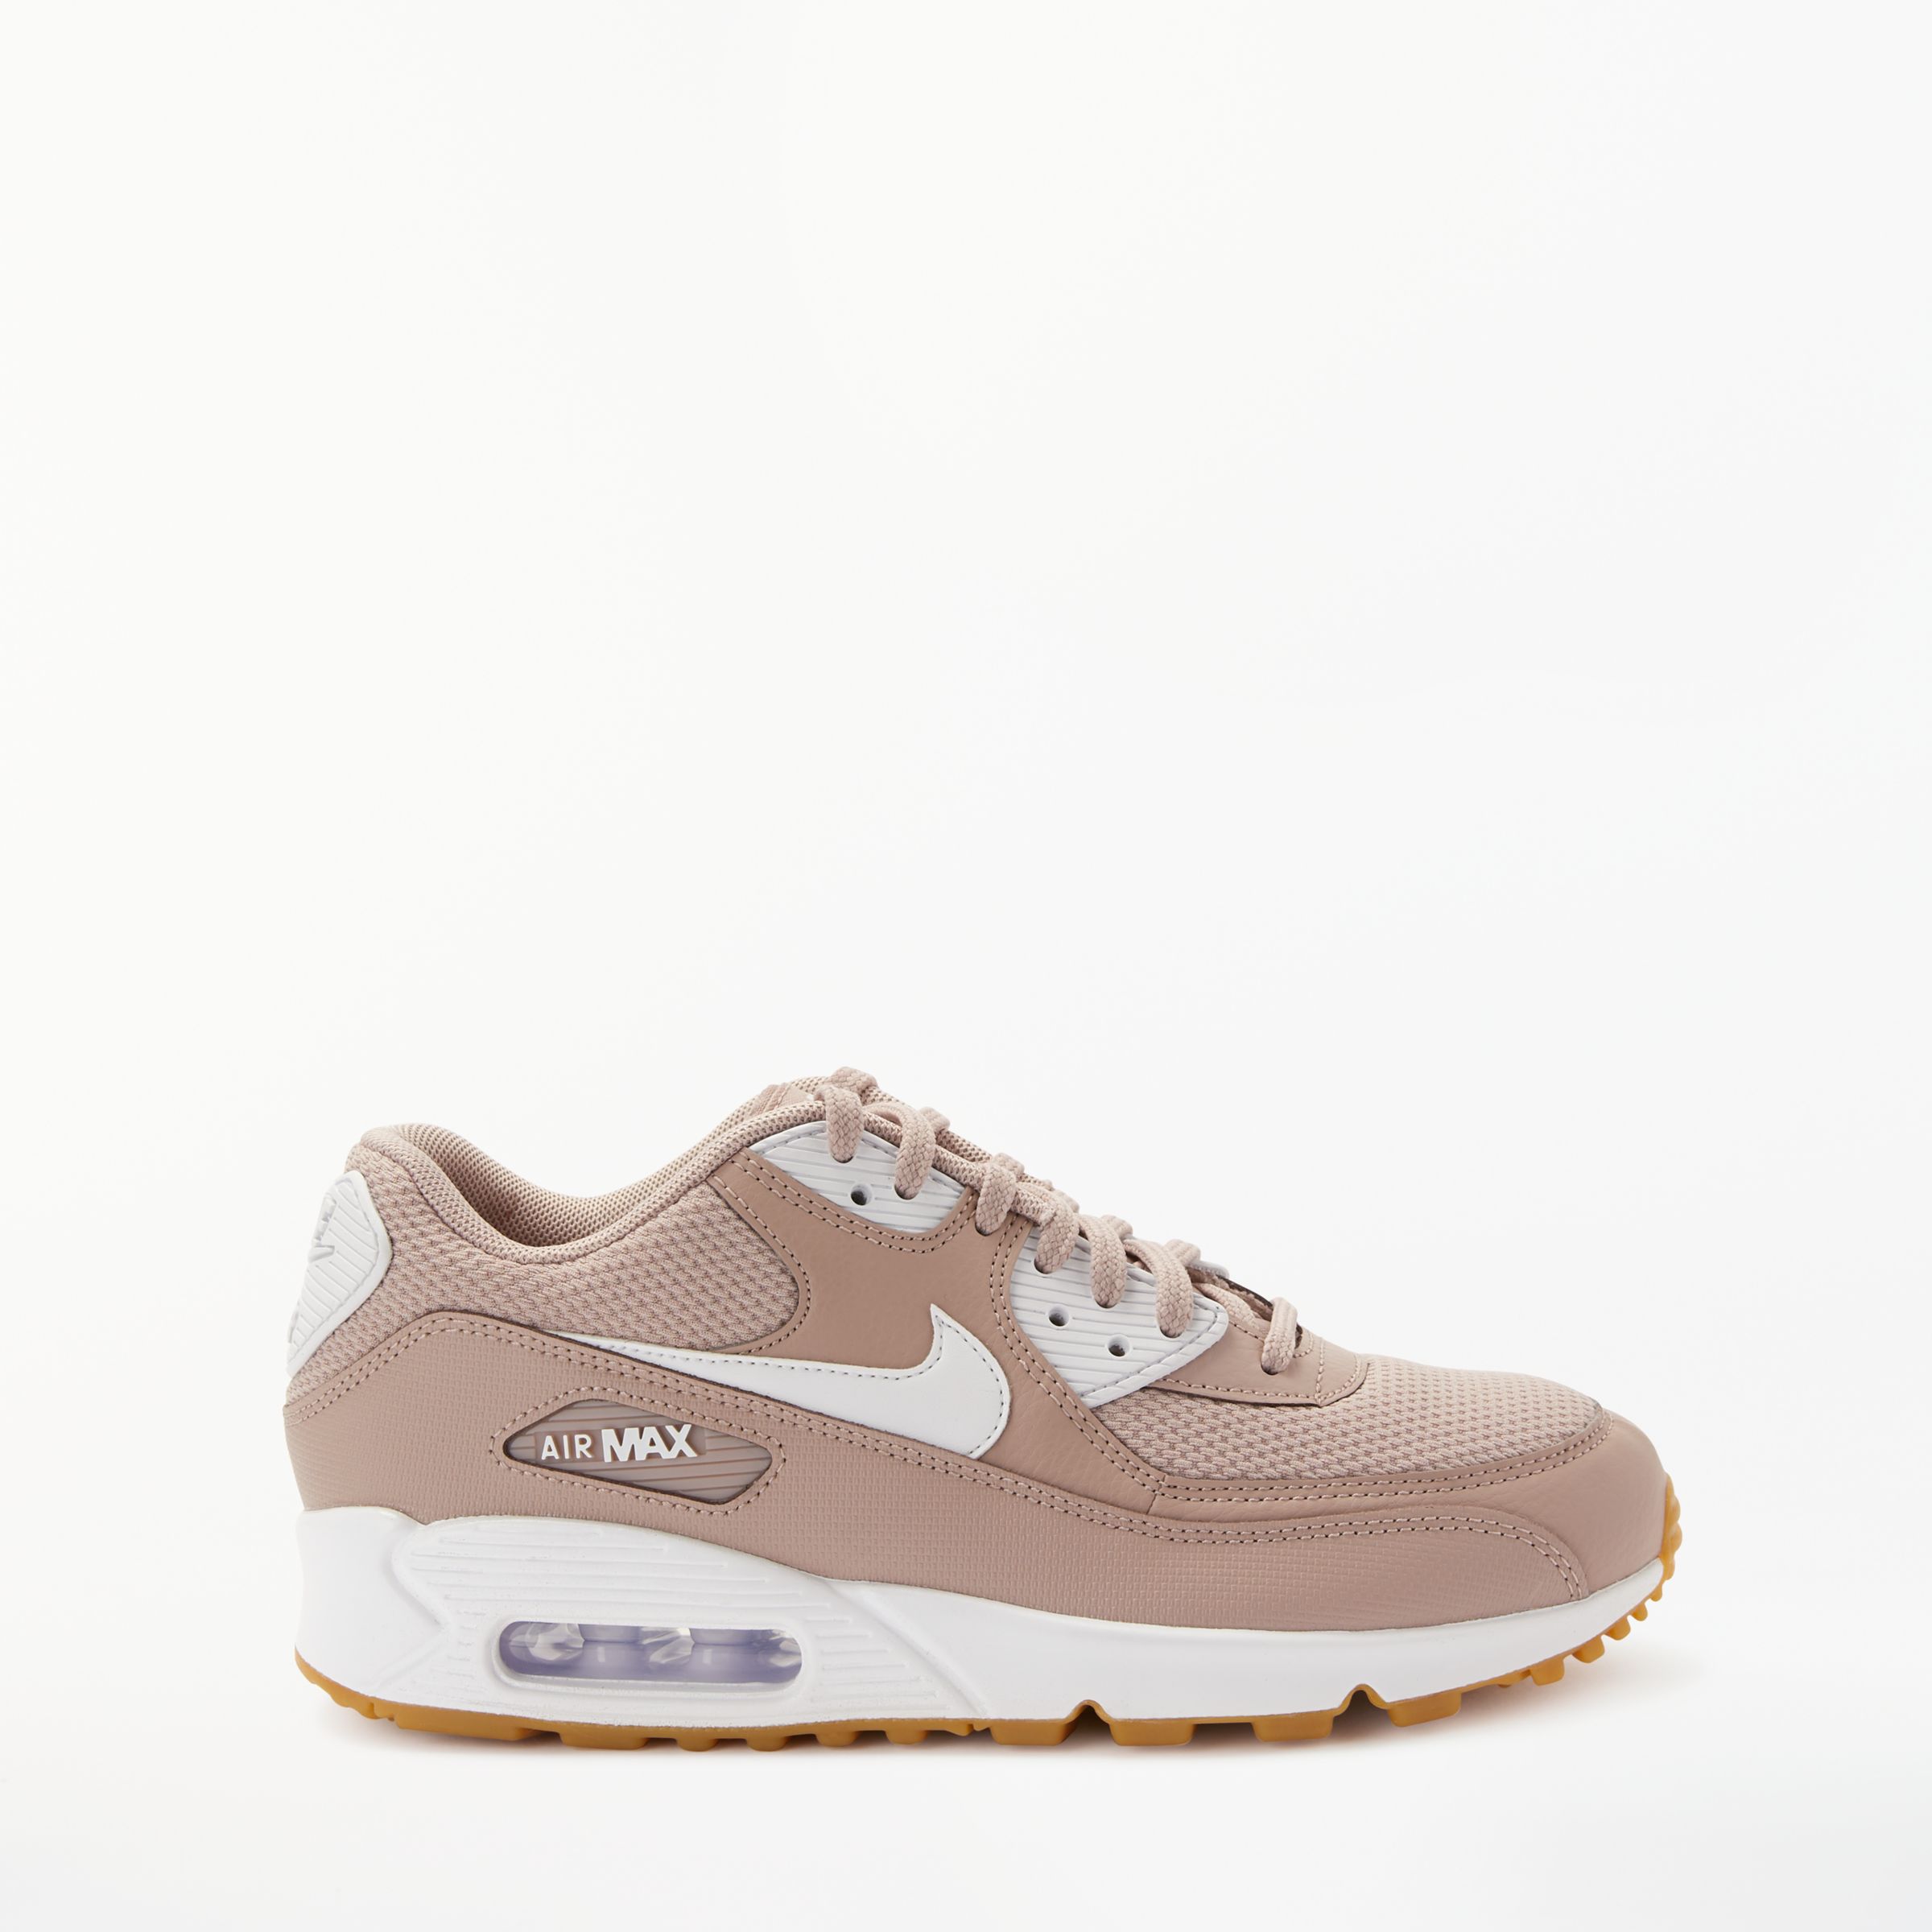 Nike Air Max 90 Women's Trainers at 